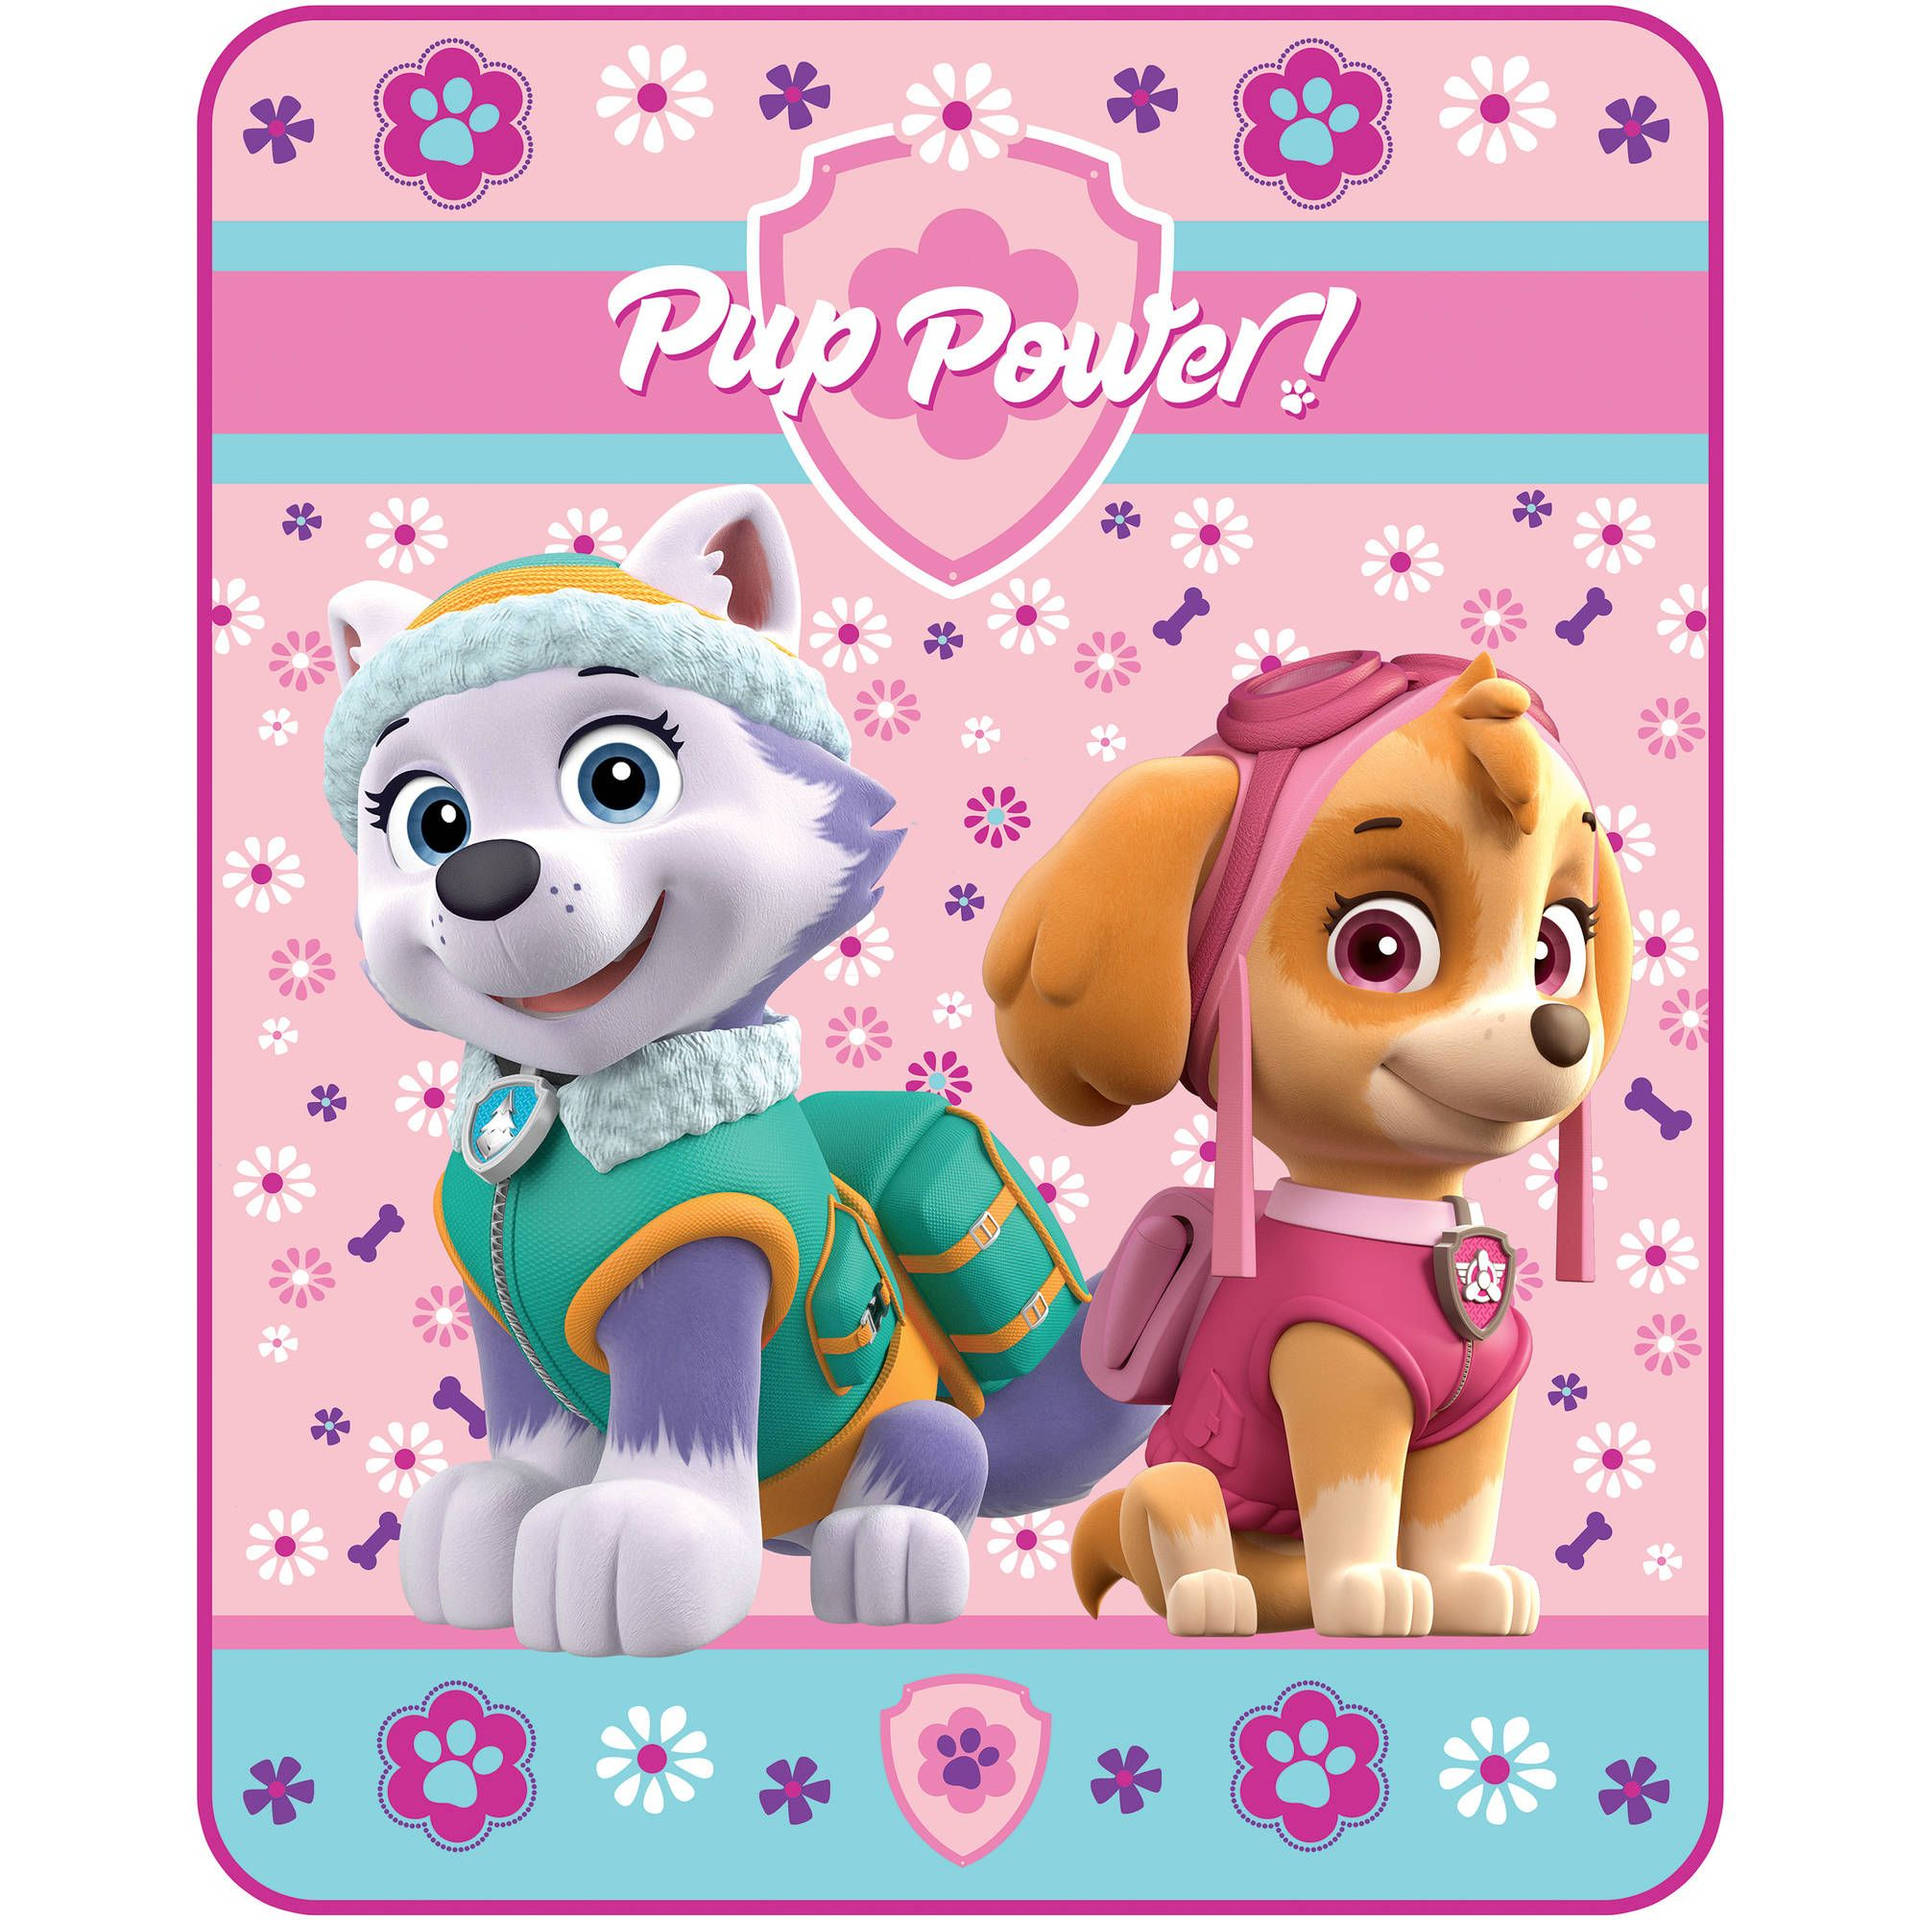 2000X2000 Paw Patrol Wallpaper and Background